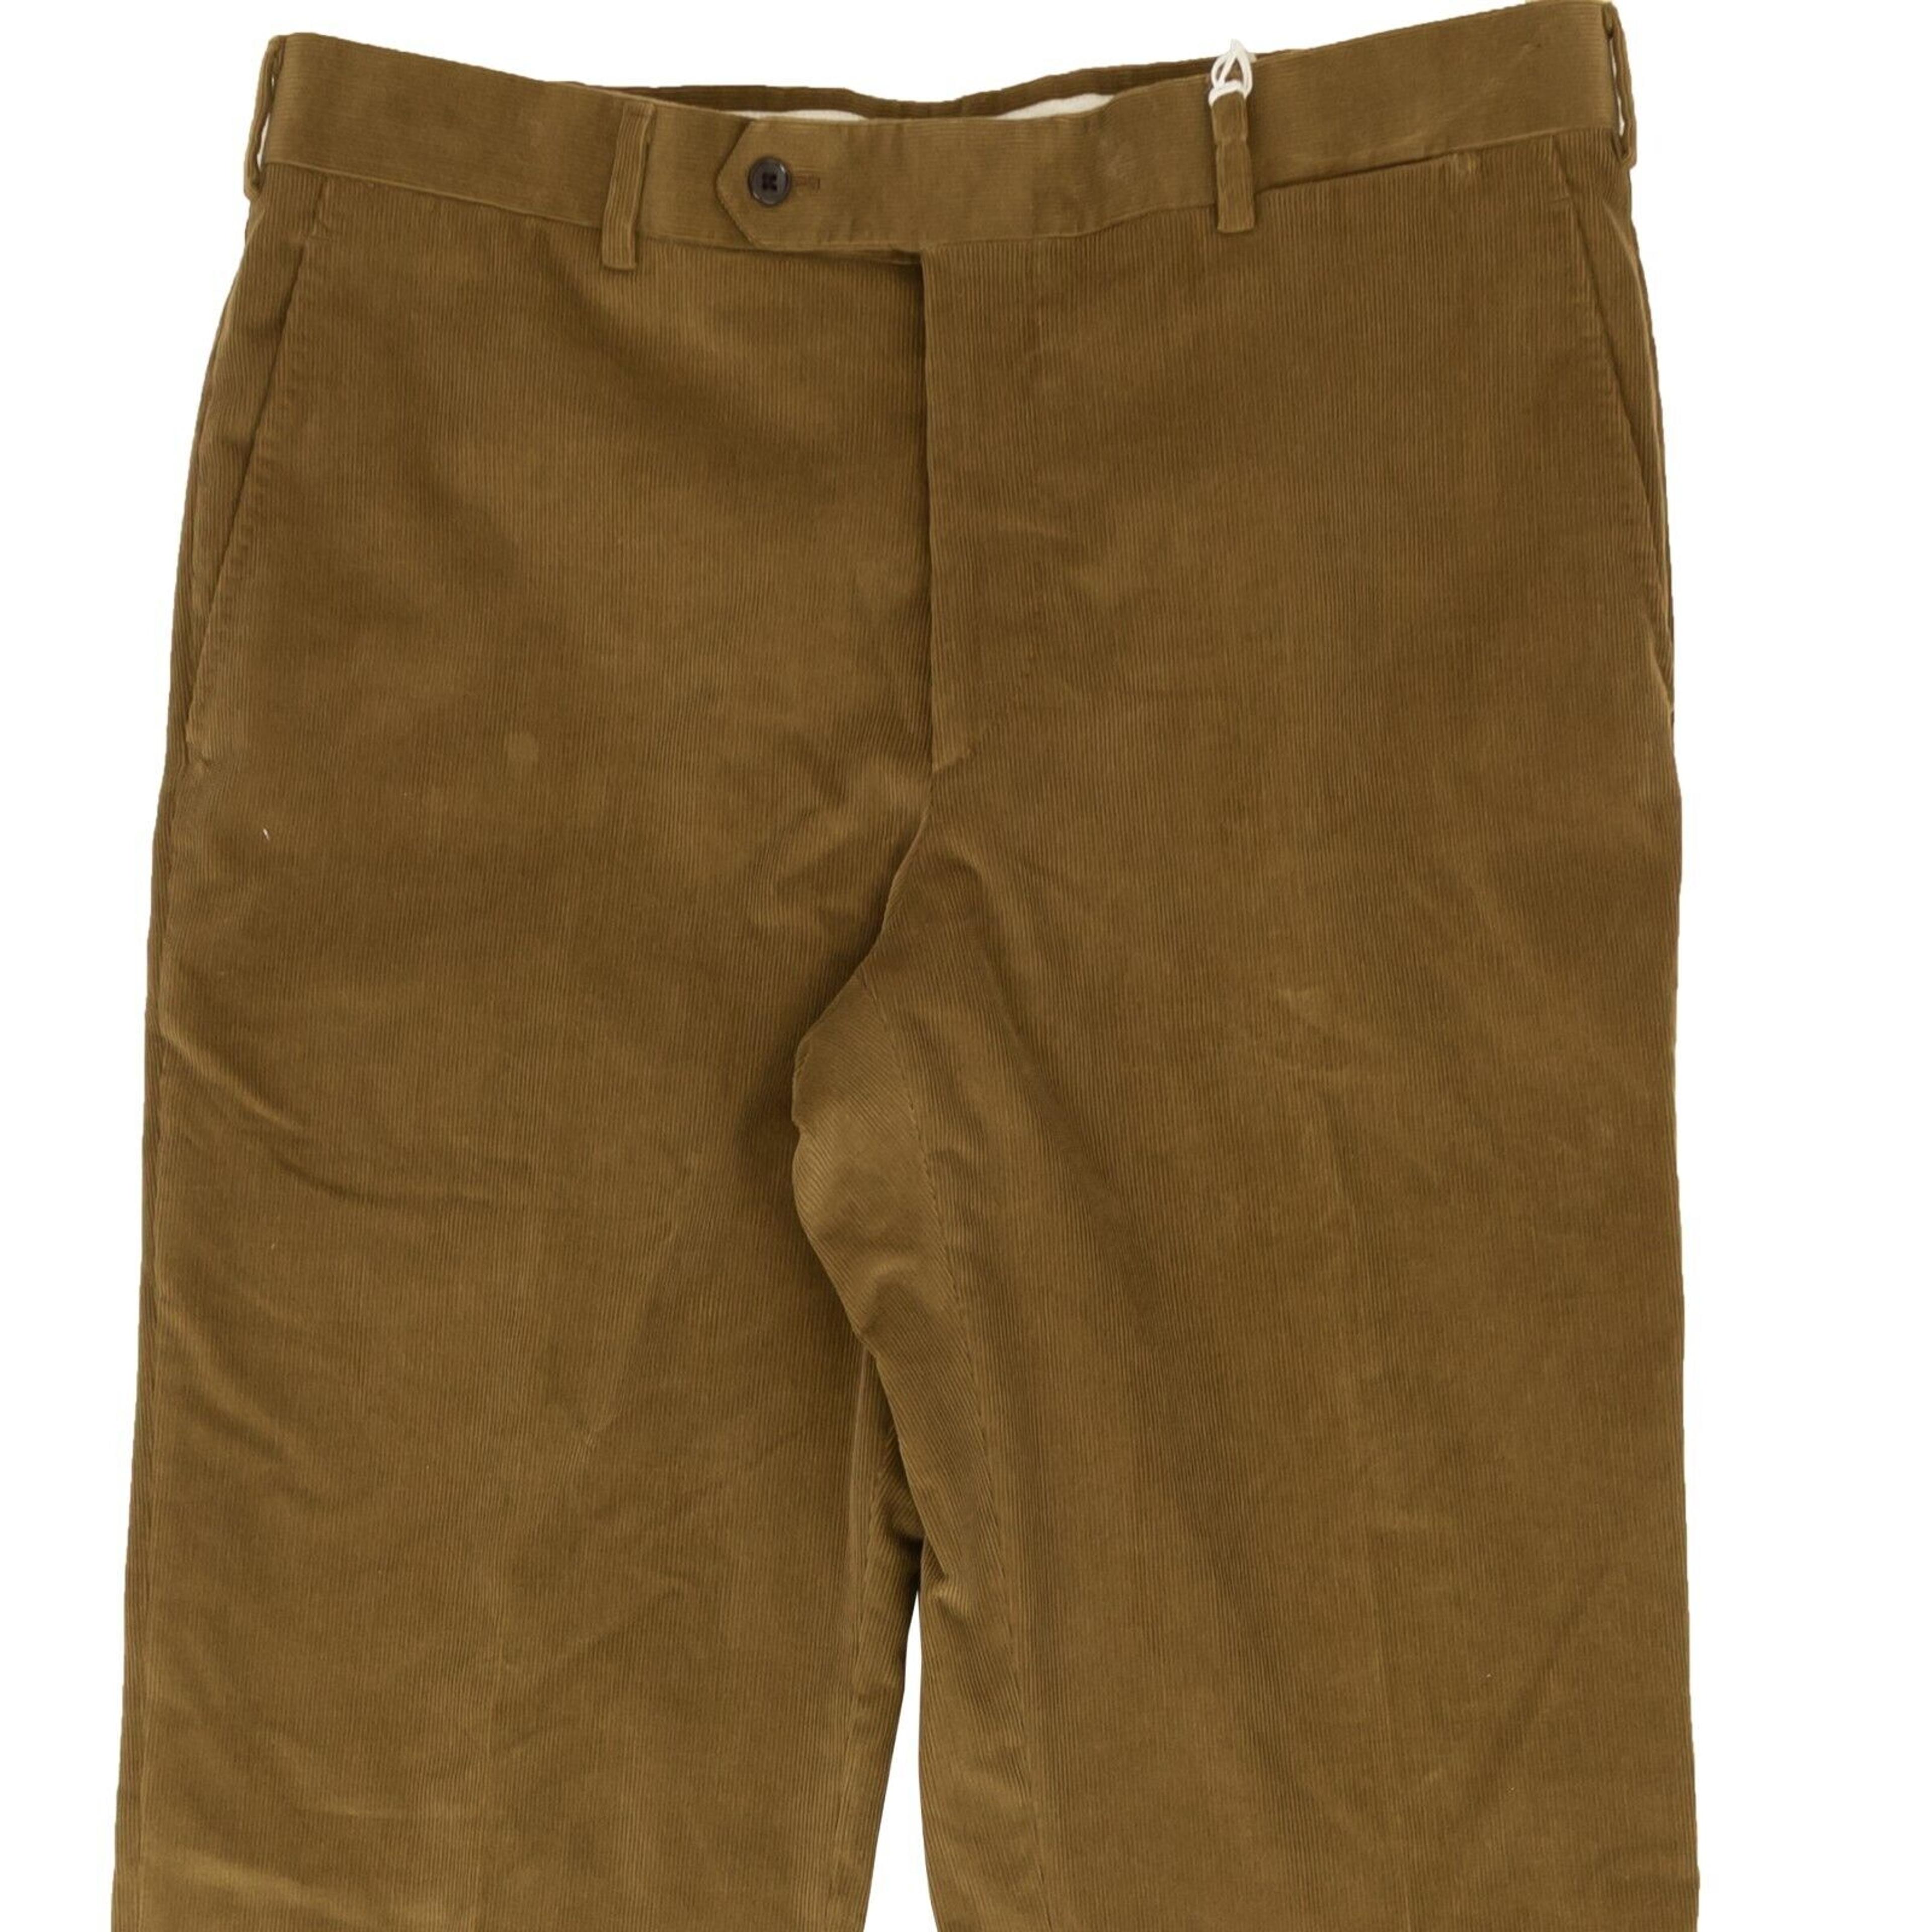 Alternate View 2 of Brown Cotton Blend Corduroy Casual Pants